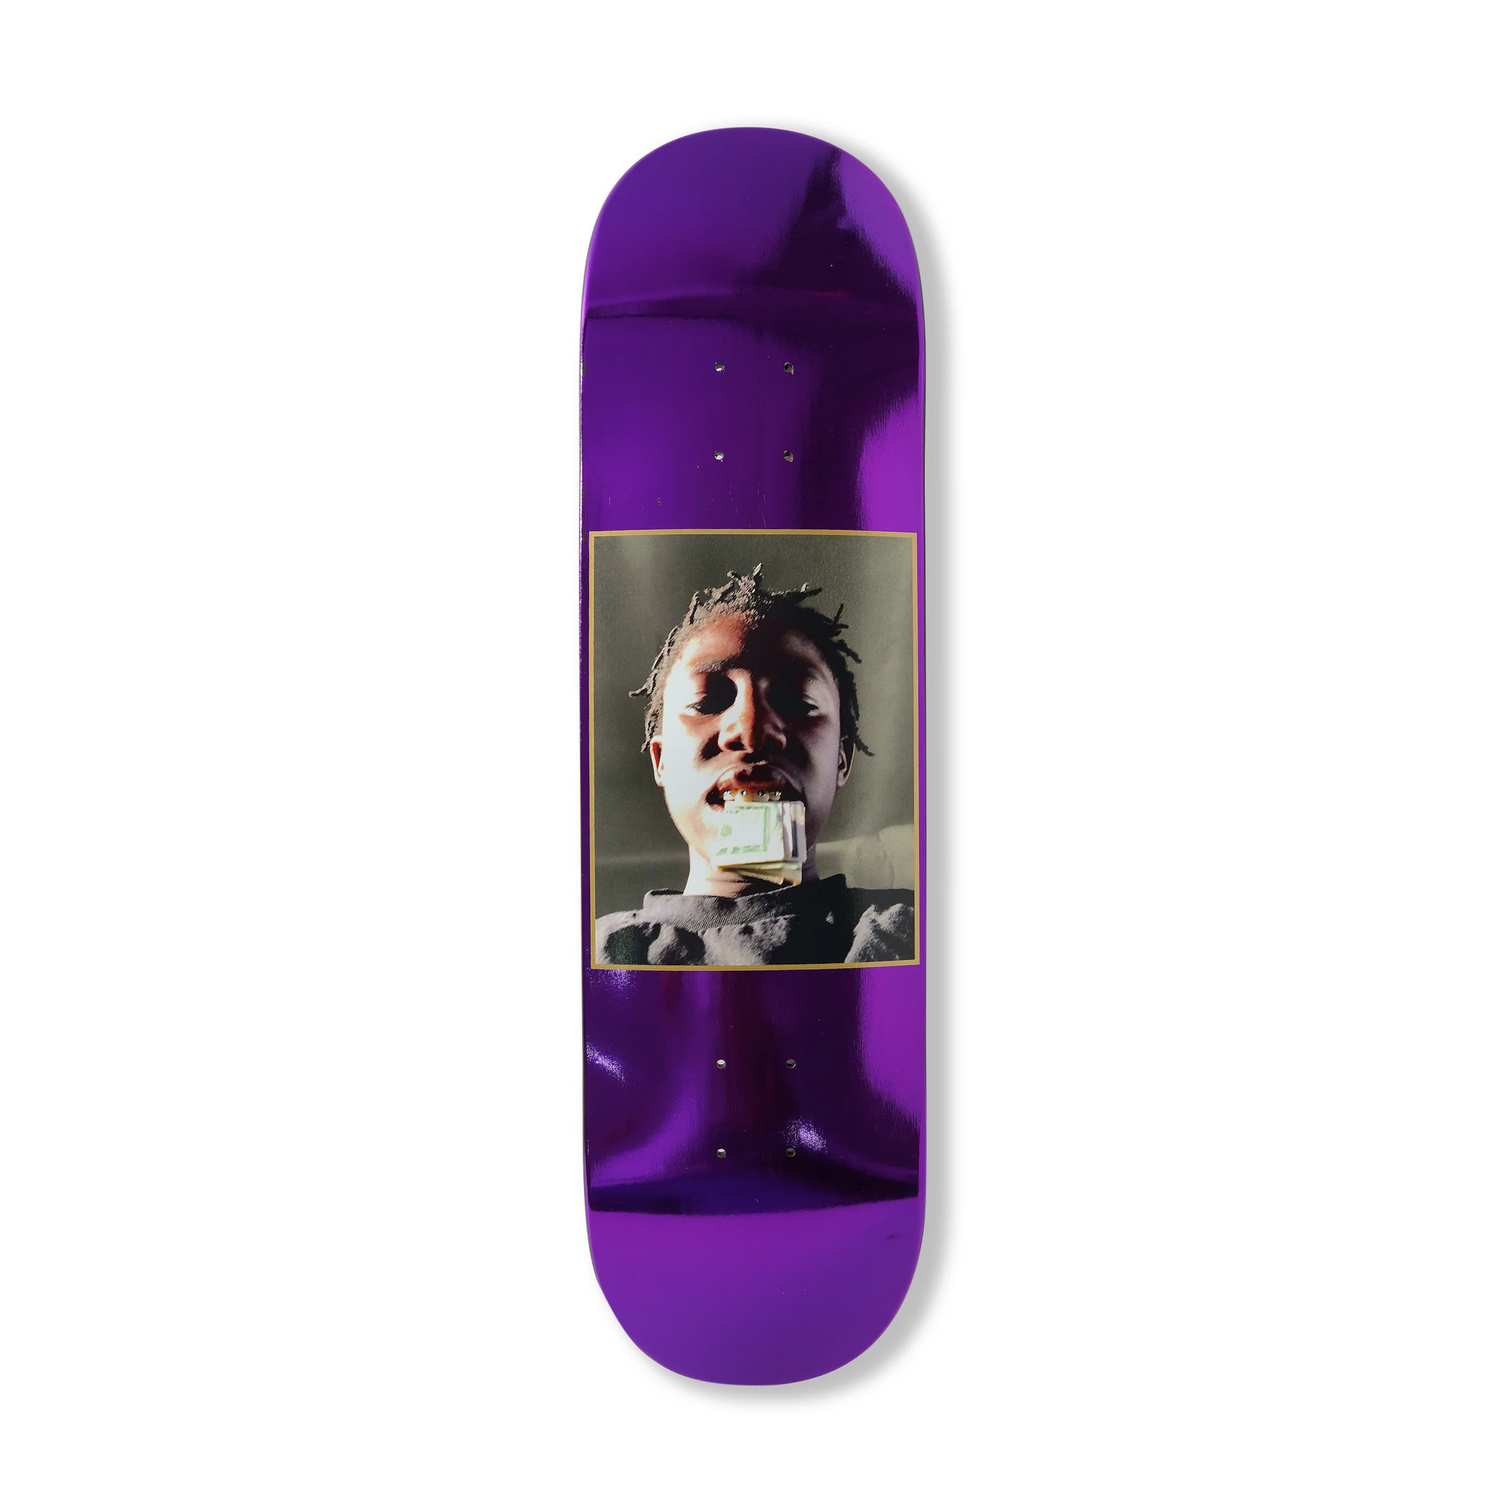 Kader 'Put Your Money Where Your Mouth Is' Deck, Metallic Purple